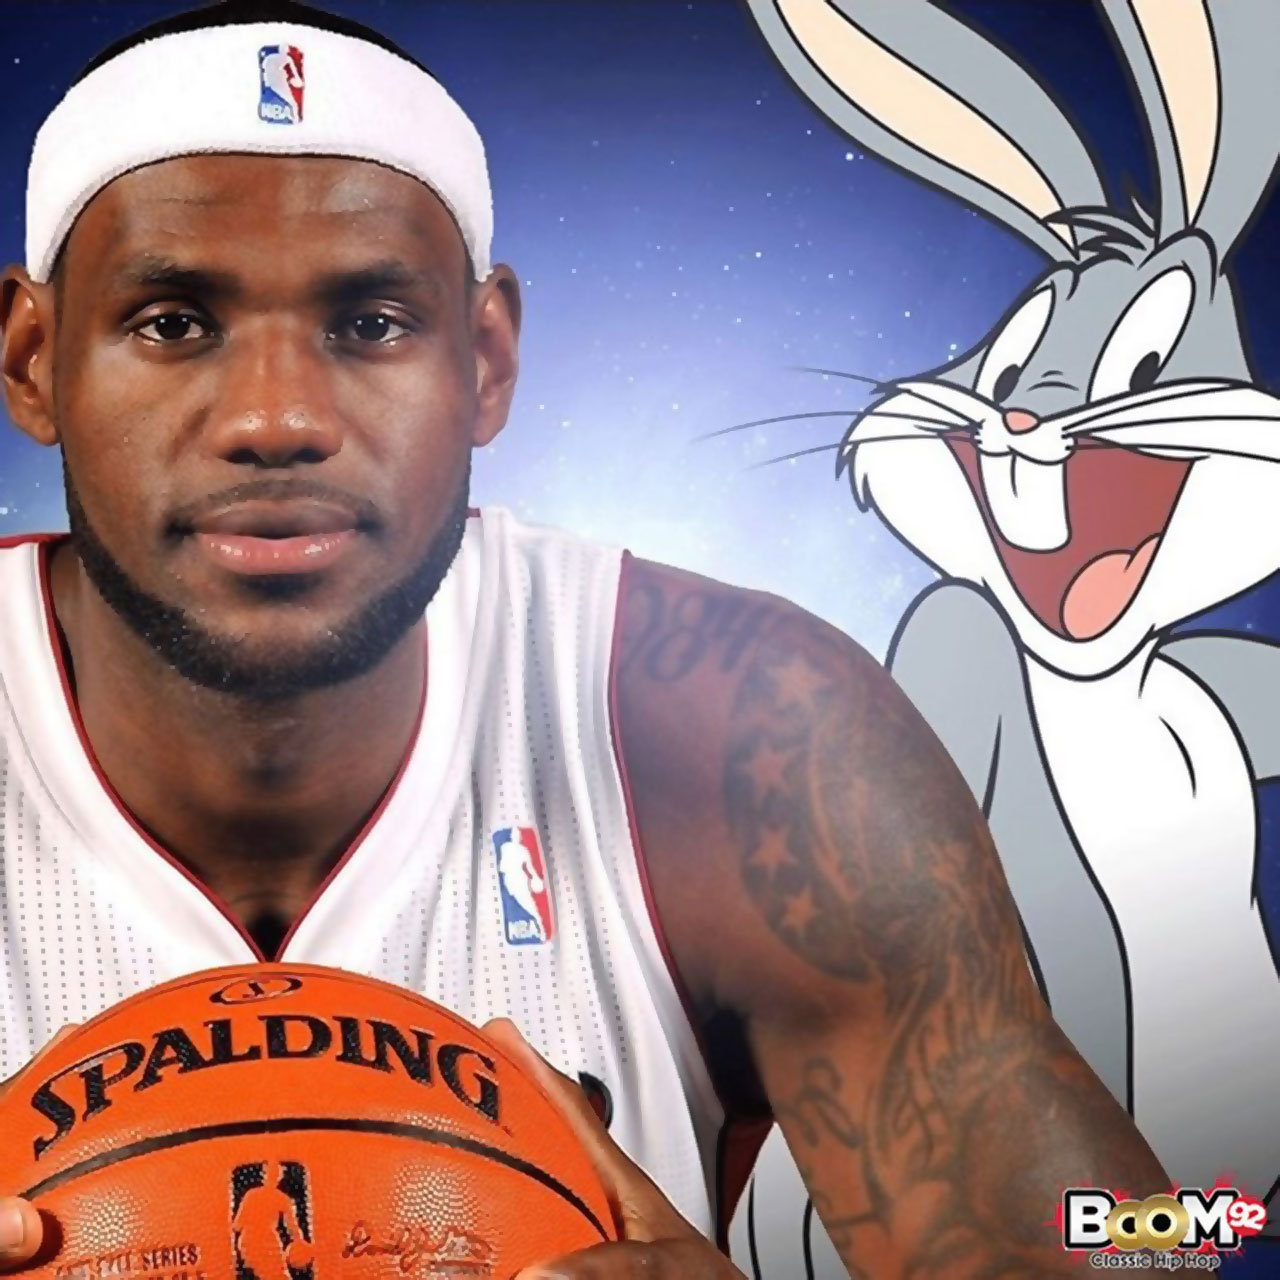 Space Jam 2 starring LeBron James and Bugs Bunny